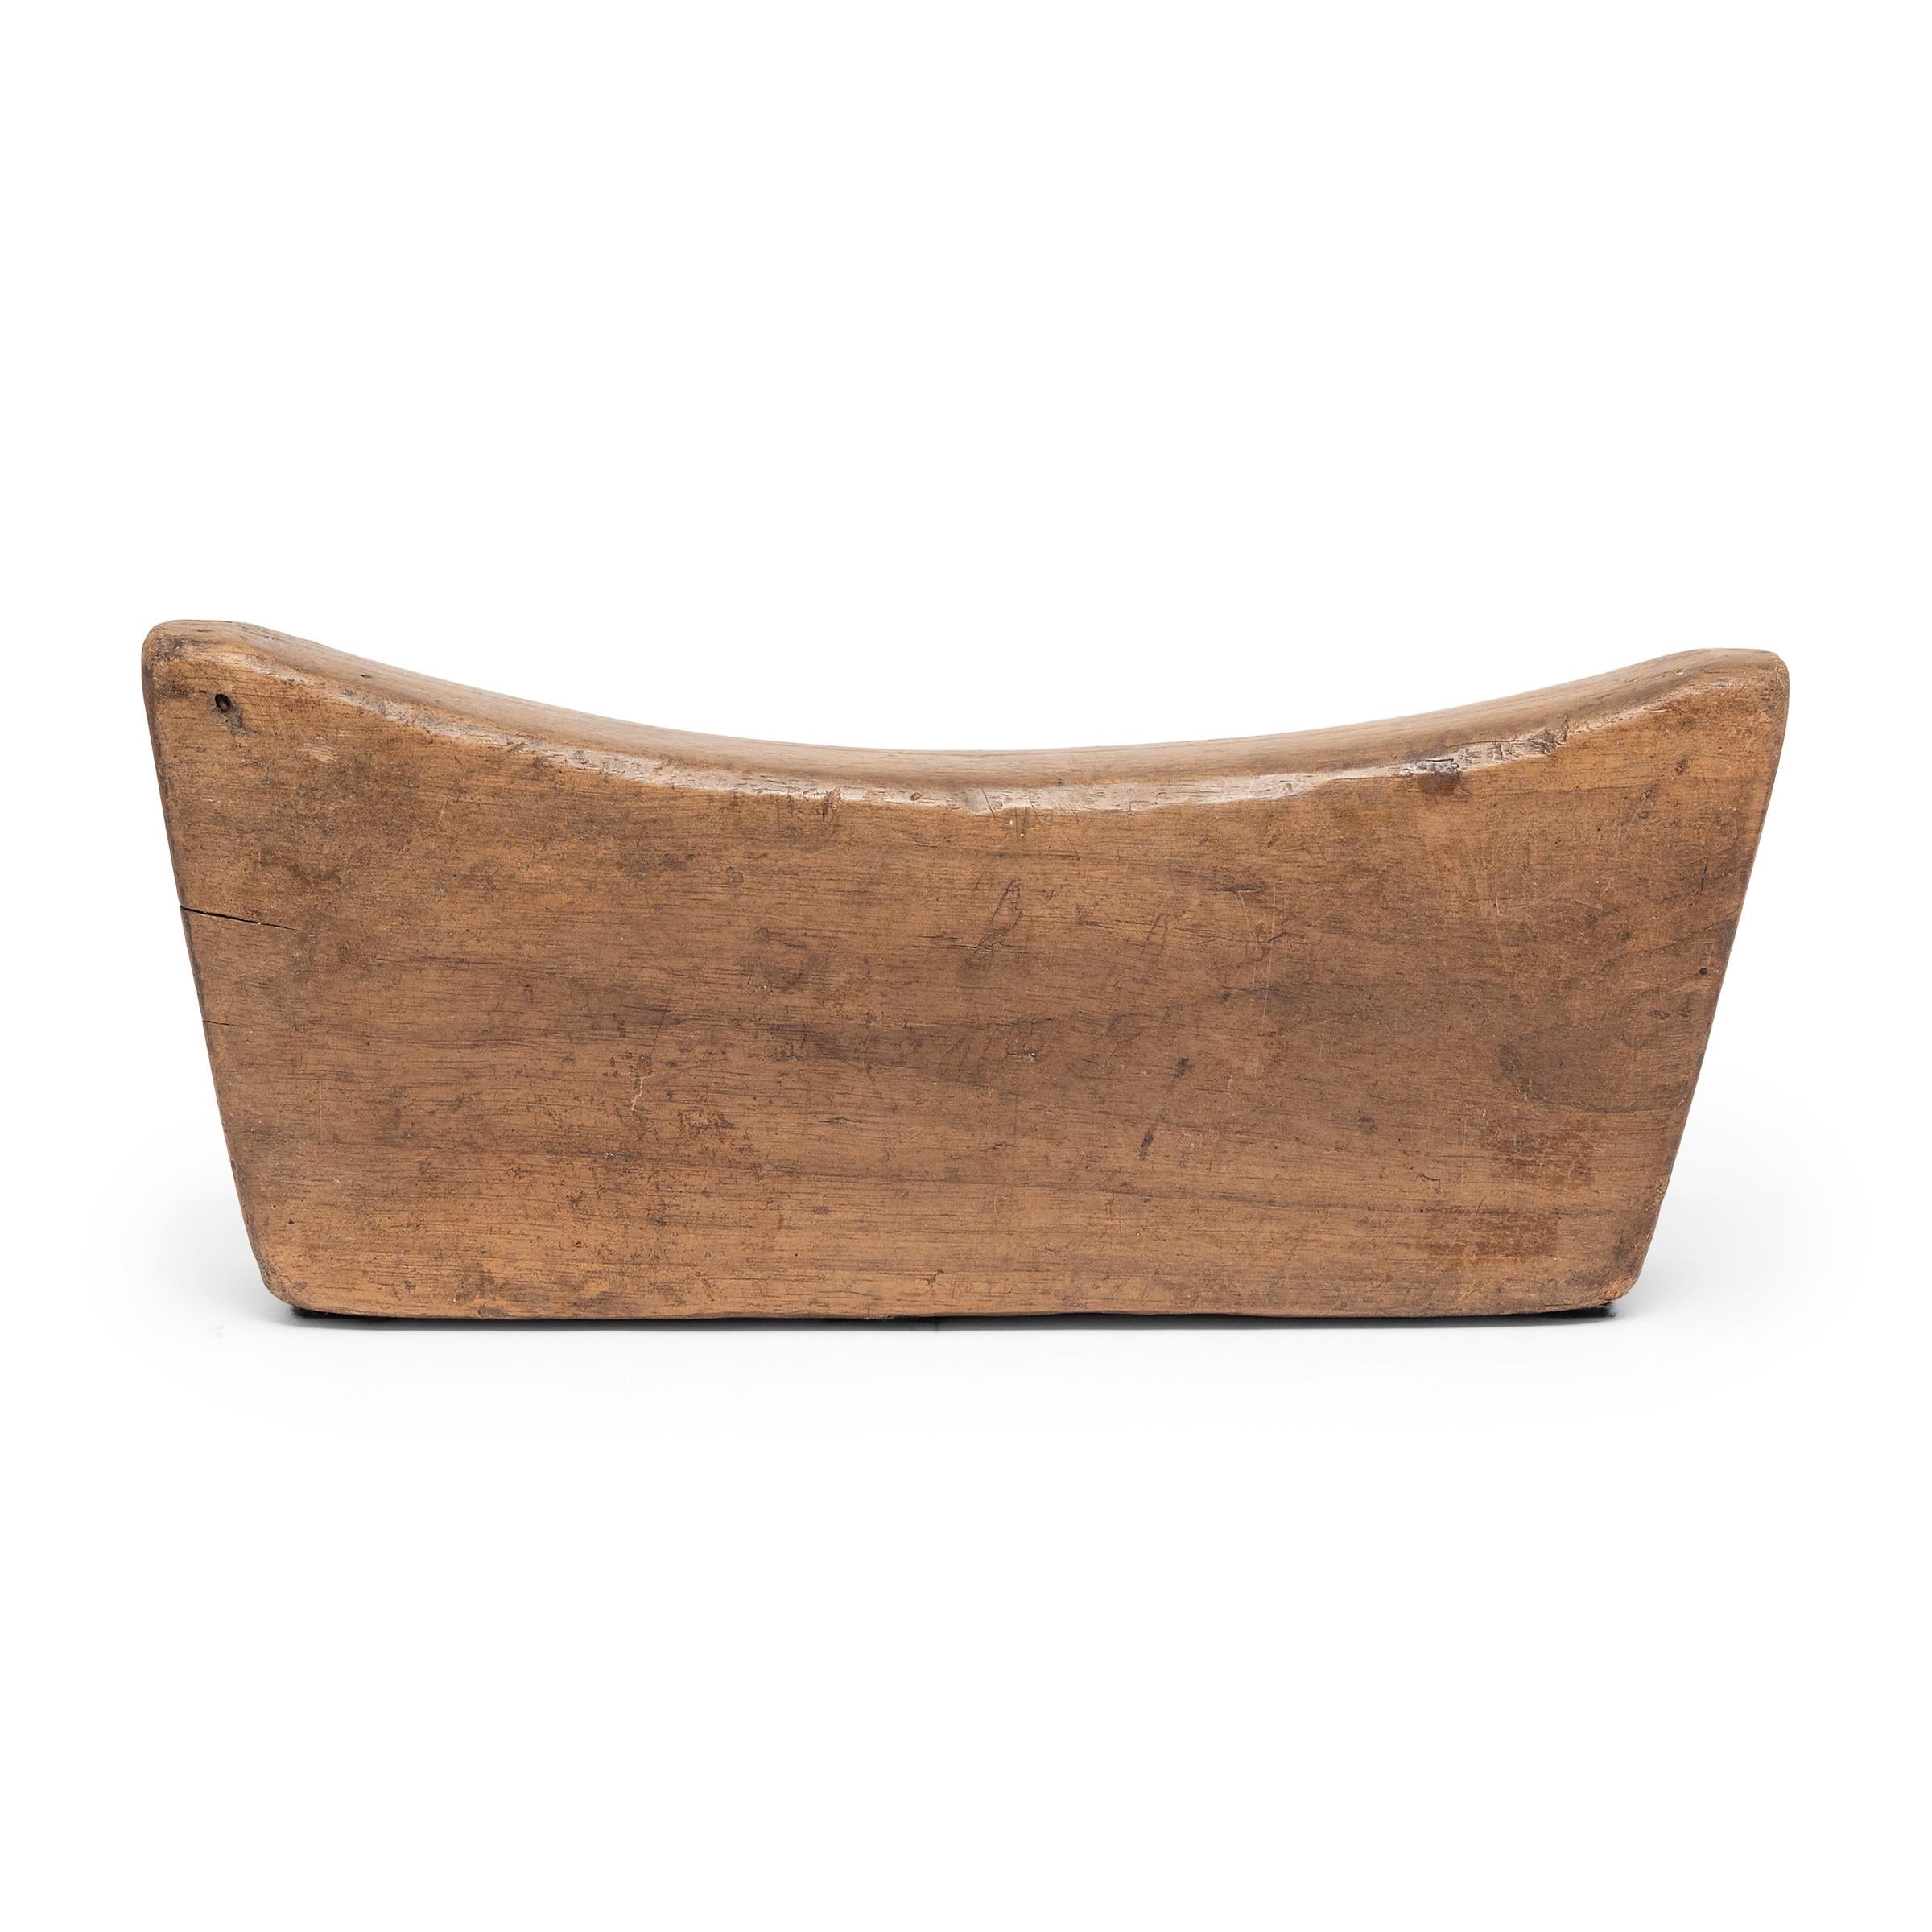 Made of Chinese northern elmwood, this smooth block of wood was once used by an upper-class woman as a headrest. The soft curve and height of the block not only supported her head and neck at rest, it also helped to preserve her intricate hairstyle.